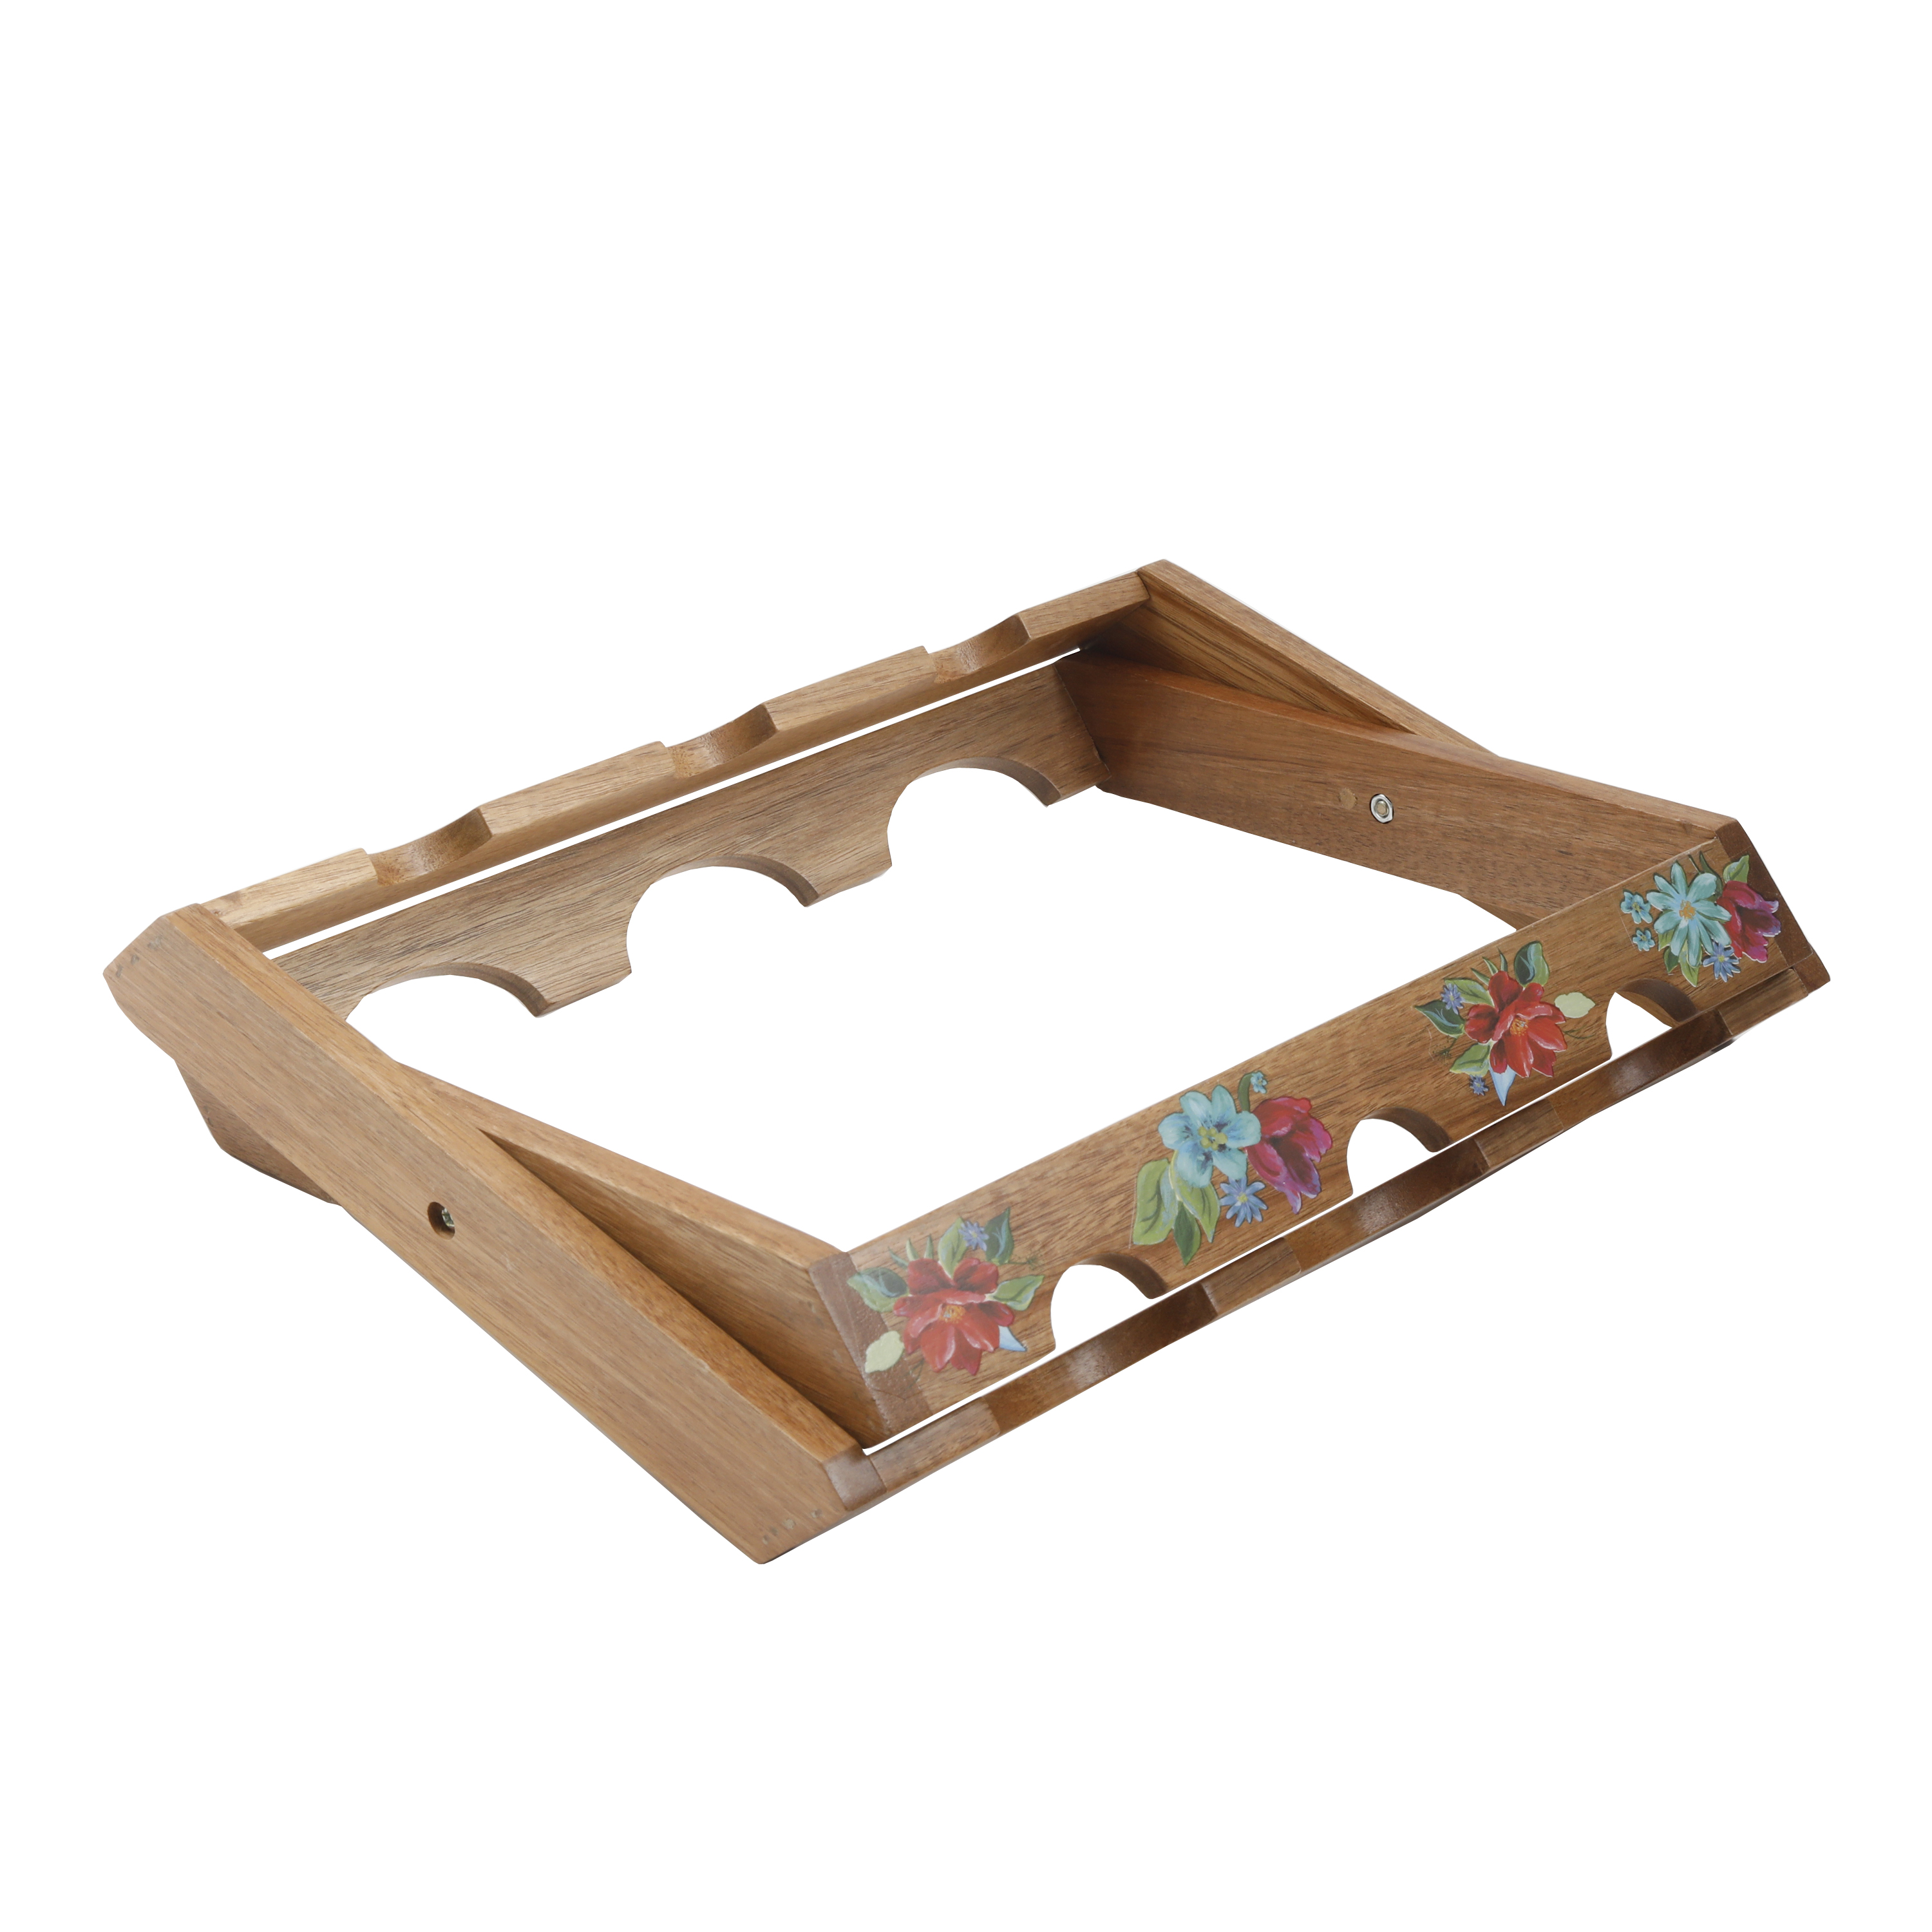 The Pioneer Woman Spring Bouquet 13.9-inch Acacia Wood Wine Rack - image 5 of 6